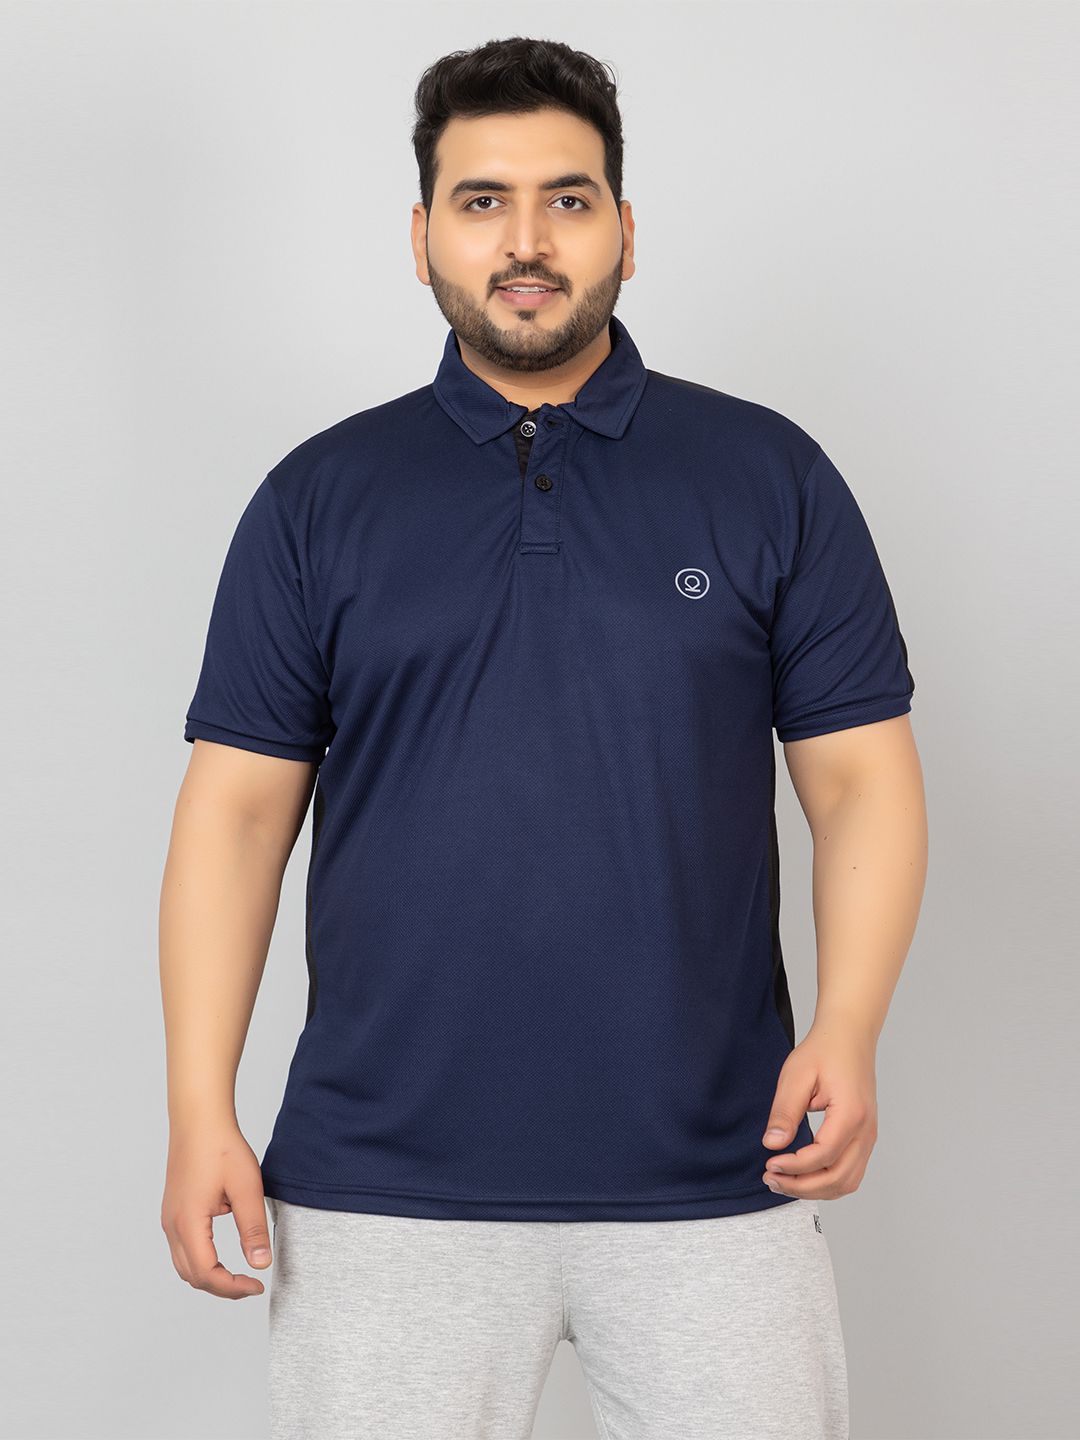     			Chkokko Polyester Regular Fit Solid Half Sleeves Men's Polo T Shirt - Navy Blue ( Pack of 1 )